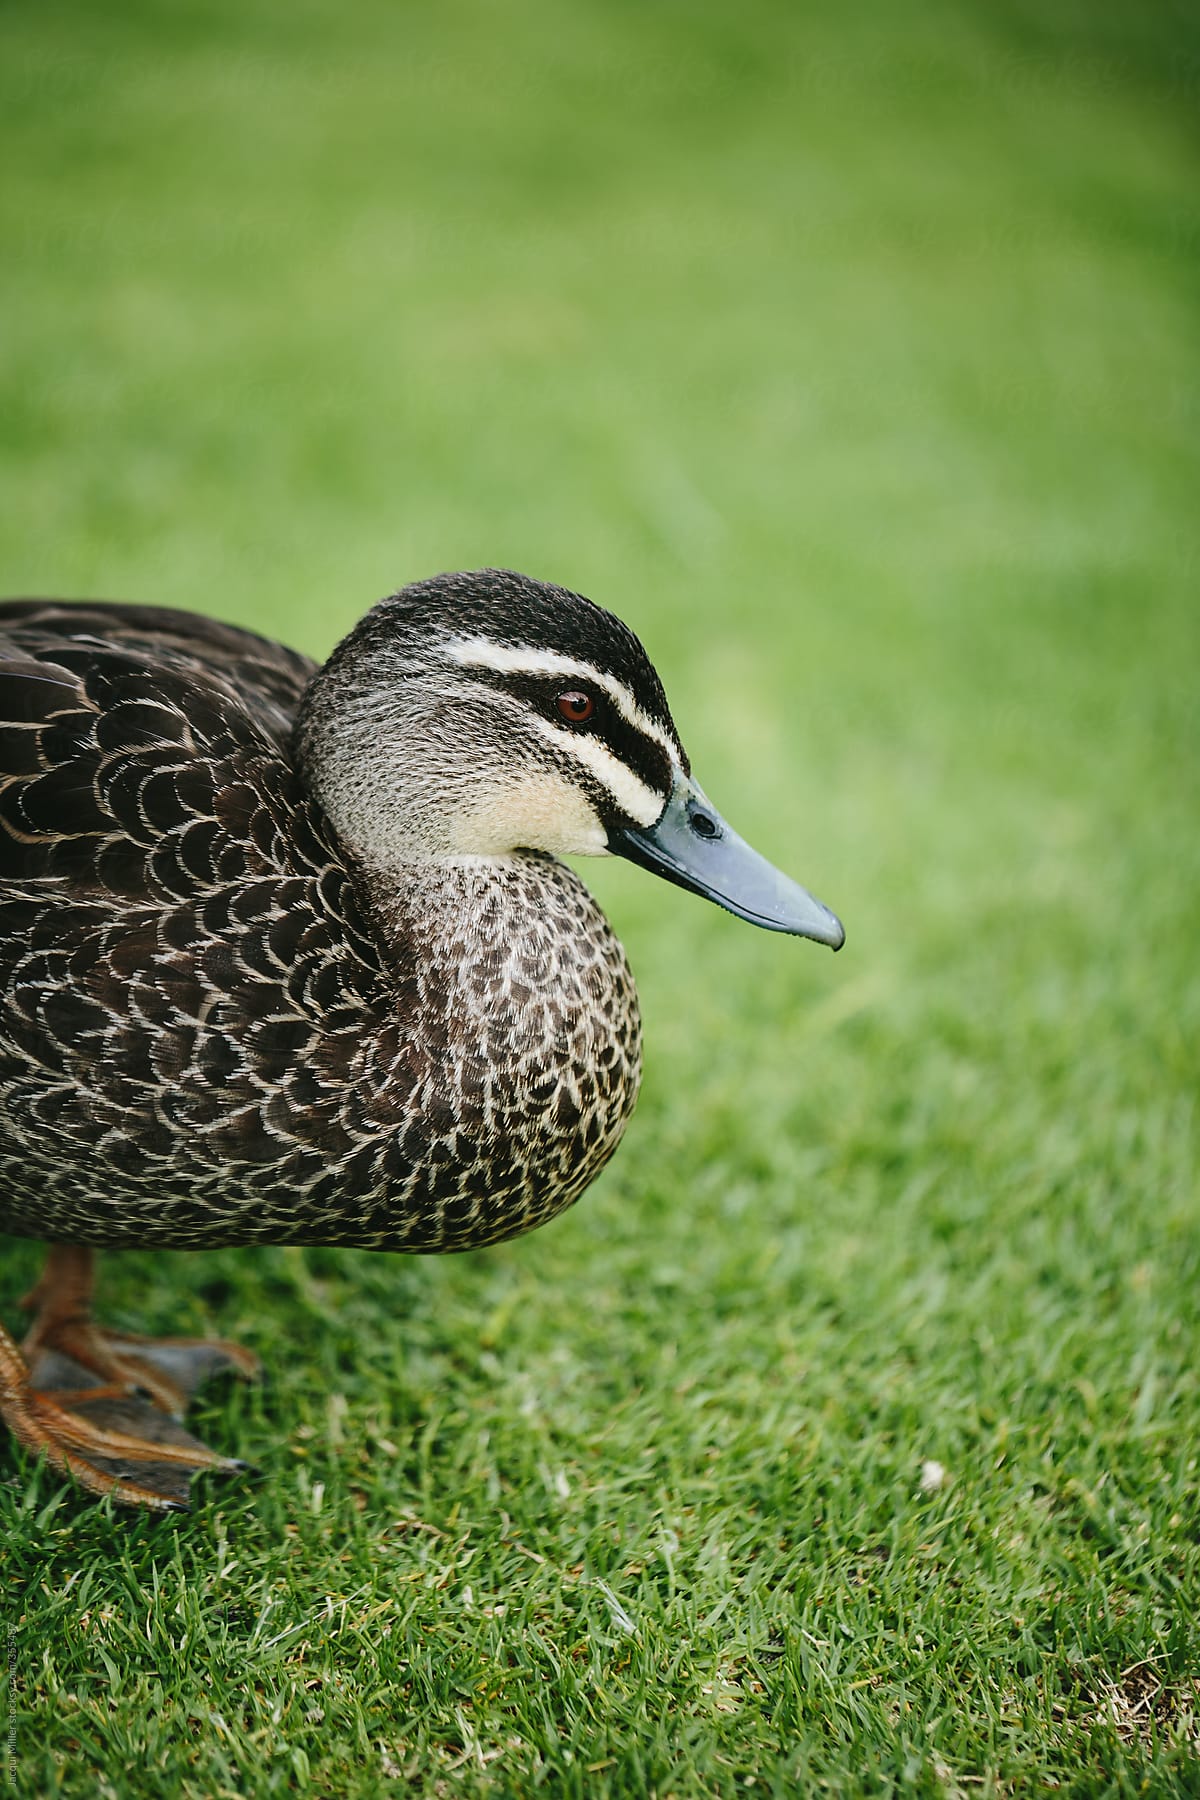 Side view of Pacific black duck (Anas superciliosa) standing on grass